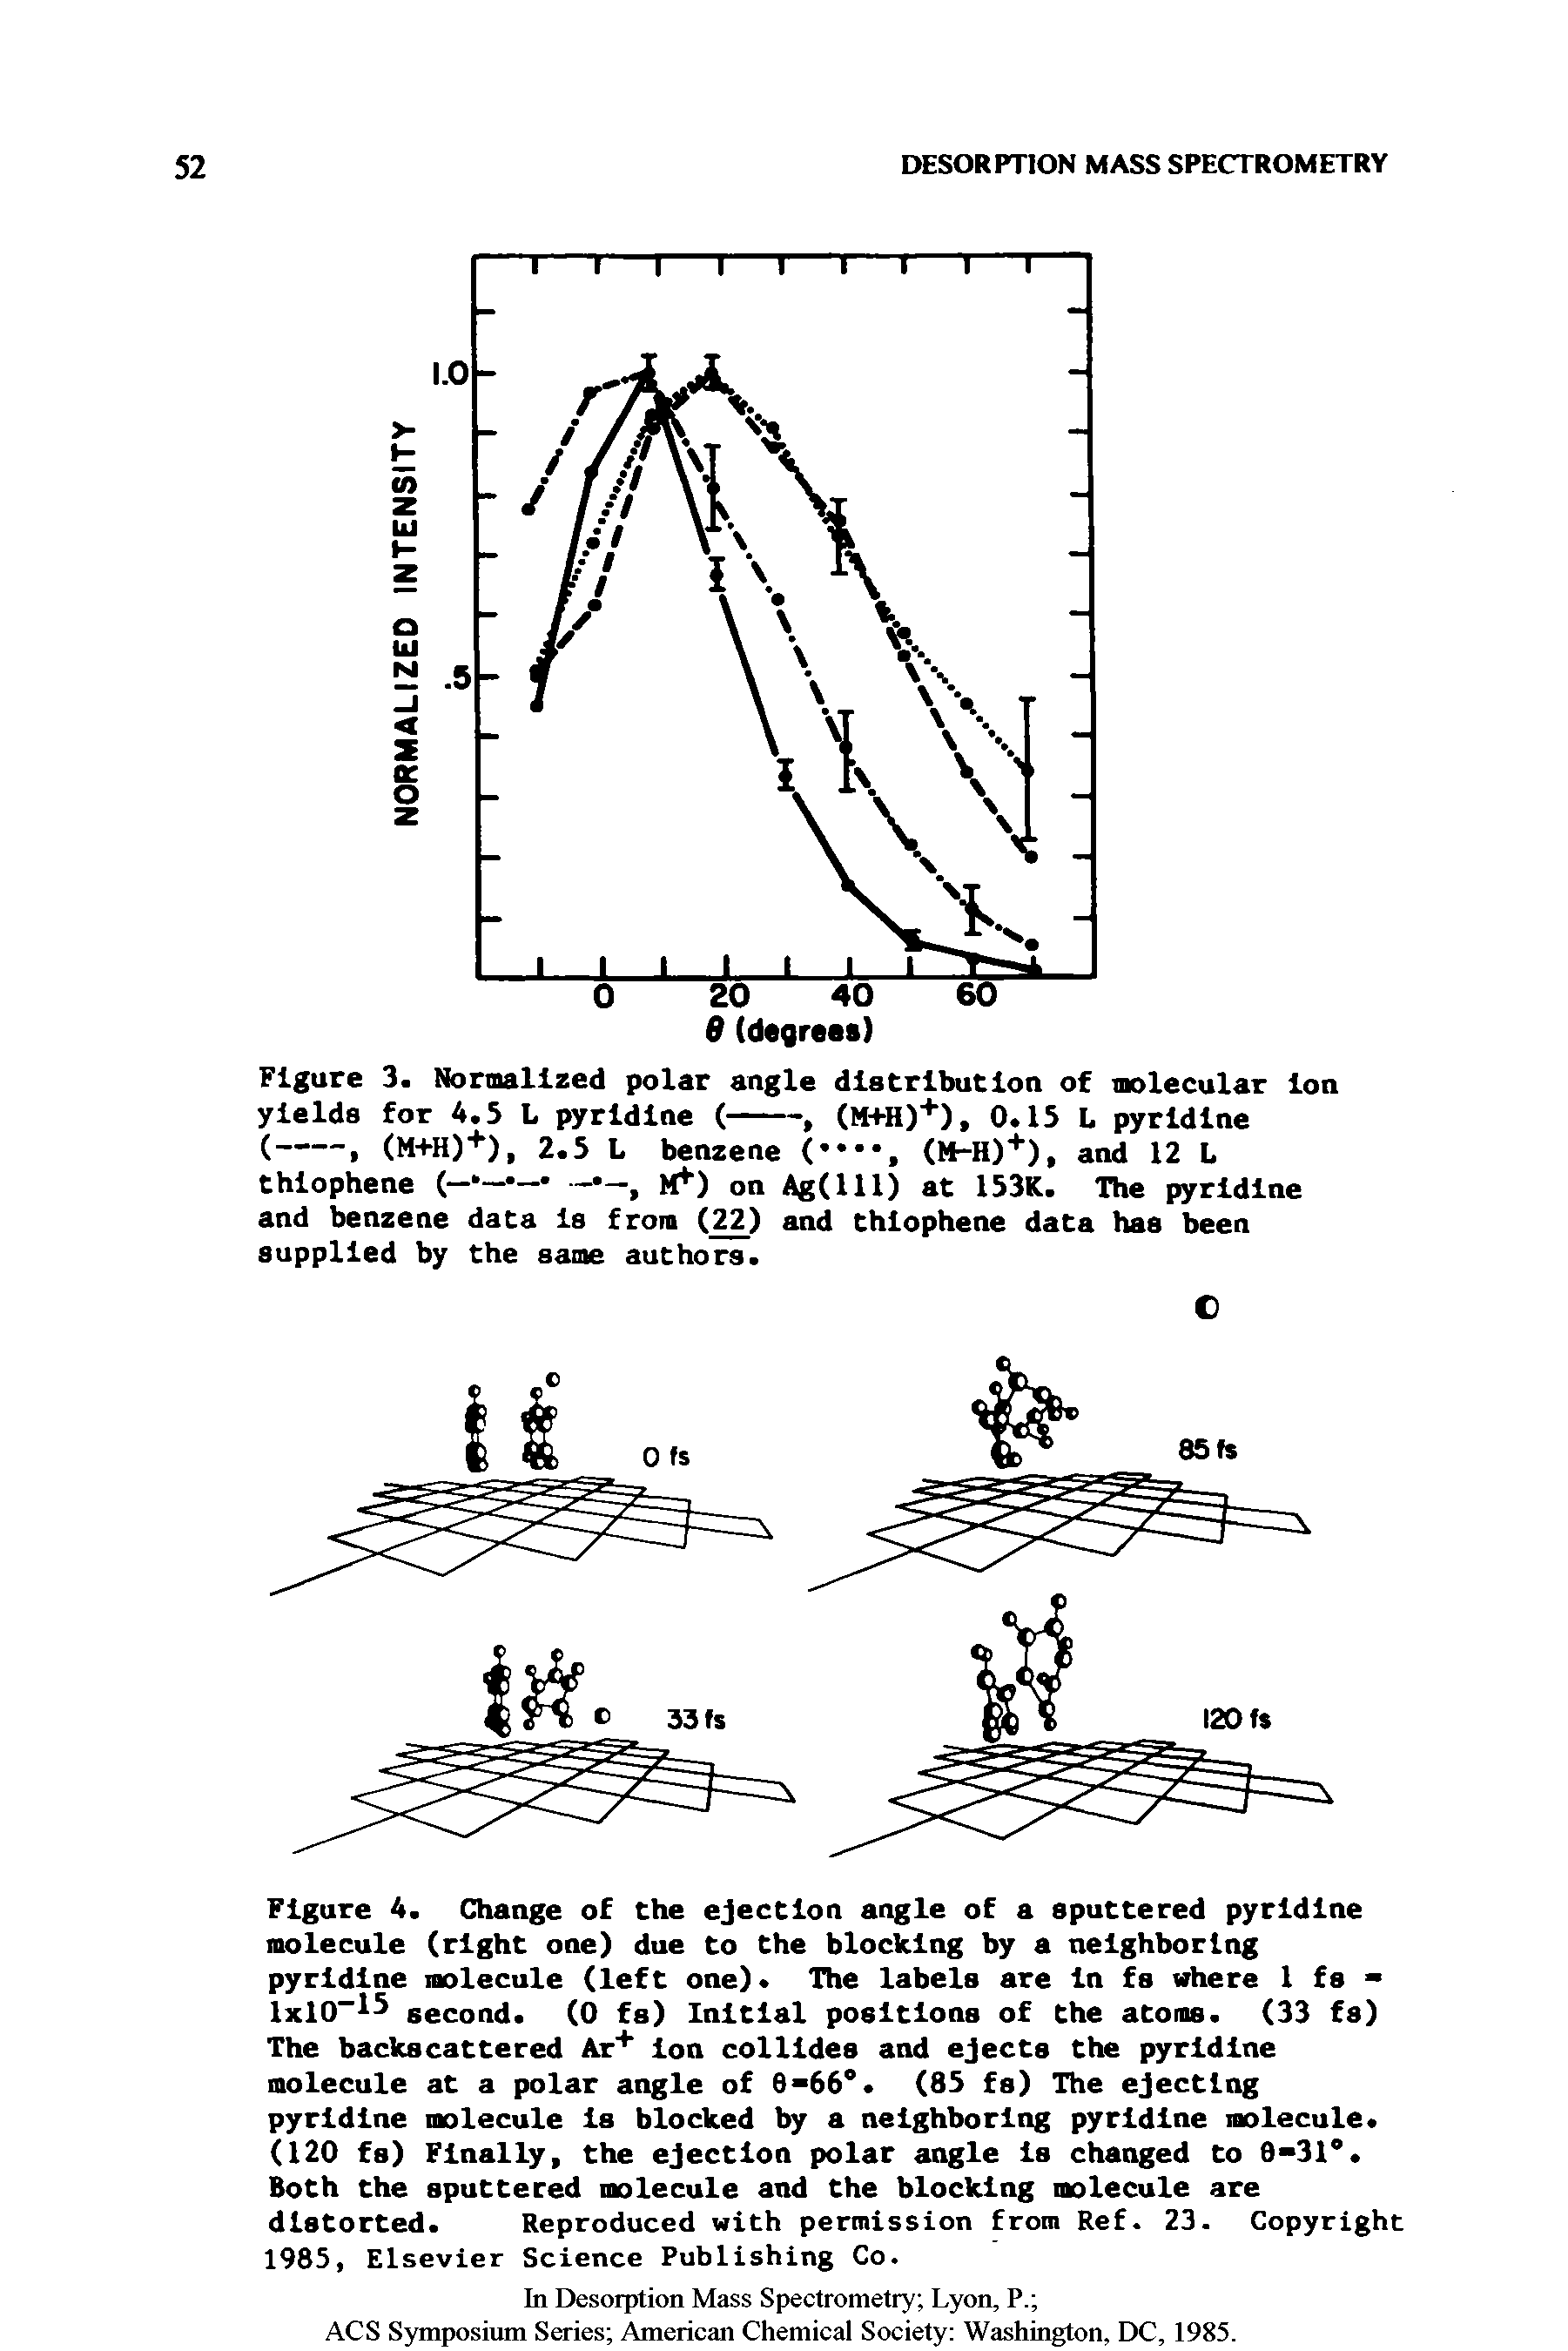 Figure 4. Change of the ejection angle of a sputtered pyridine molecule (right one) due to the blocking by a neighboring pyridine molecule (left one). The labels are in fs where 1 fe lxl0 15 second. (0 fs) Initial positions of the atoms. (33 fs) The backscattered Ar+ ion collides and ejects the pyridine molecule at a polar angle of 8-66° (85 fs) The ejecting...